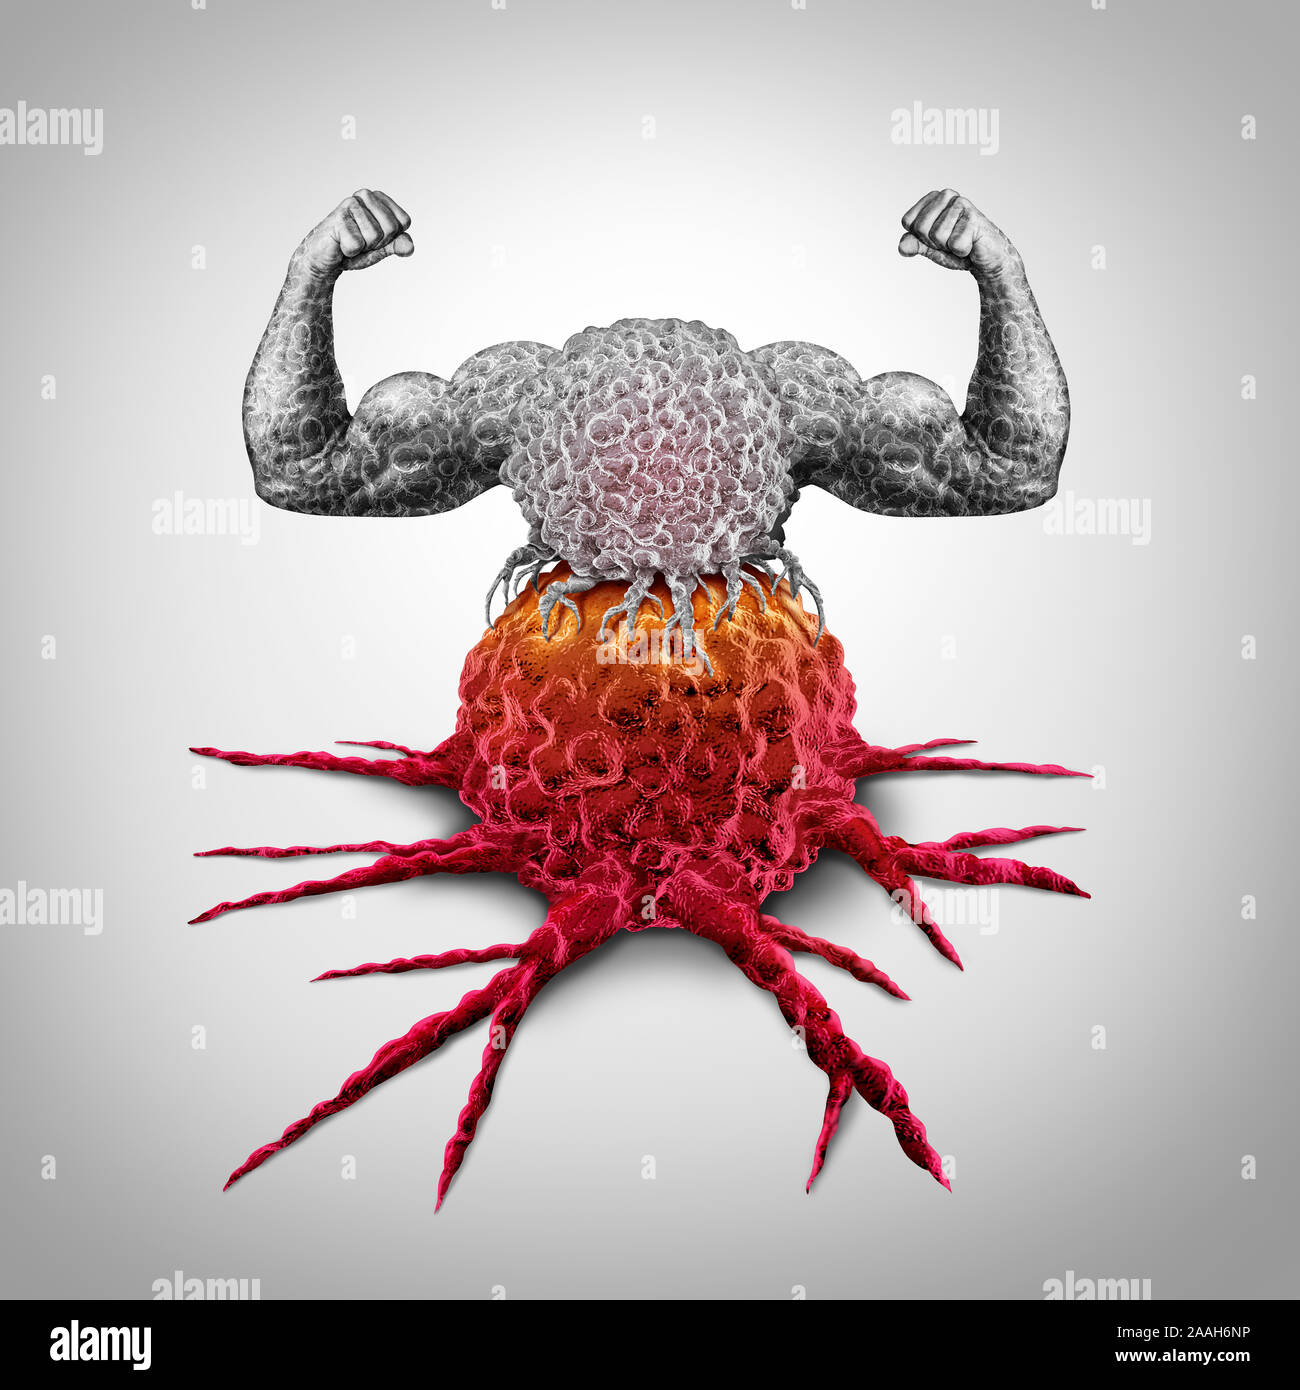 Strong immune system T cell attacking a cancer tumor as an Immunotherapy therapy concept as a biomedical or biomedicine oncology strength. Stock Photo